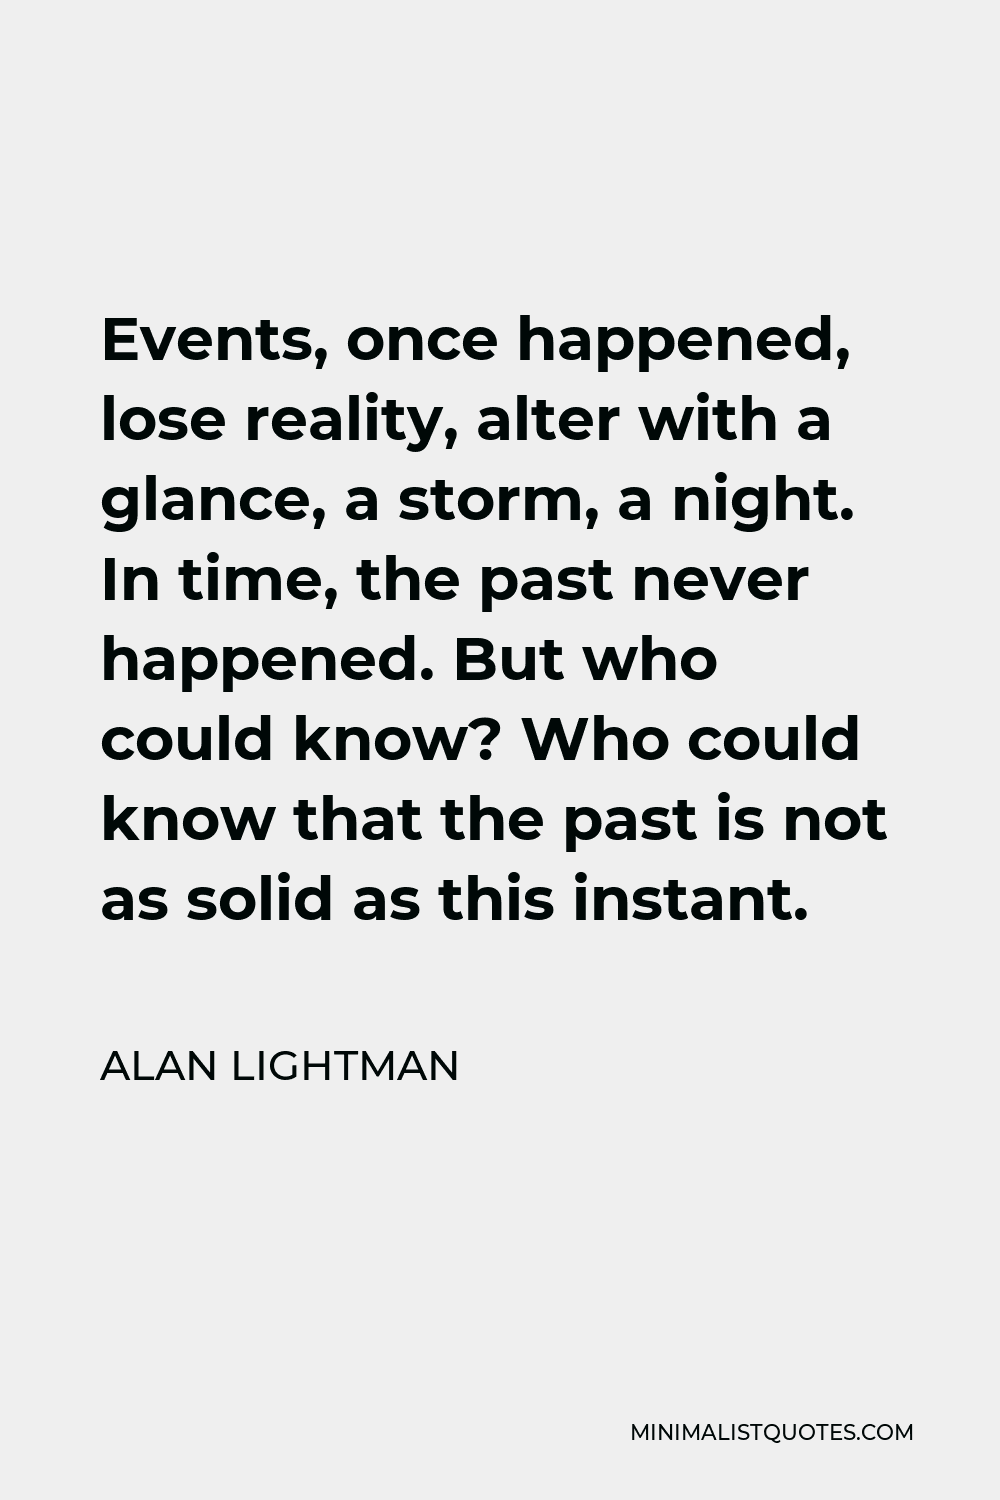 Alan Lightman Quote - Events, once happened, lose reality, alter with a glance, a storm, a night. In time, the past never happened. But who could know? Who could know that the past is not as solid as this instant.